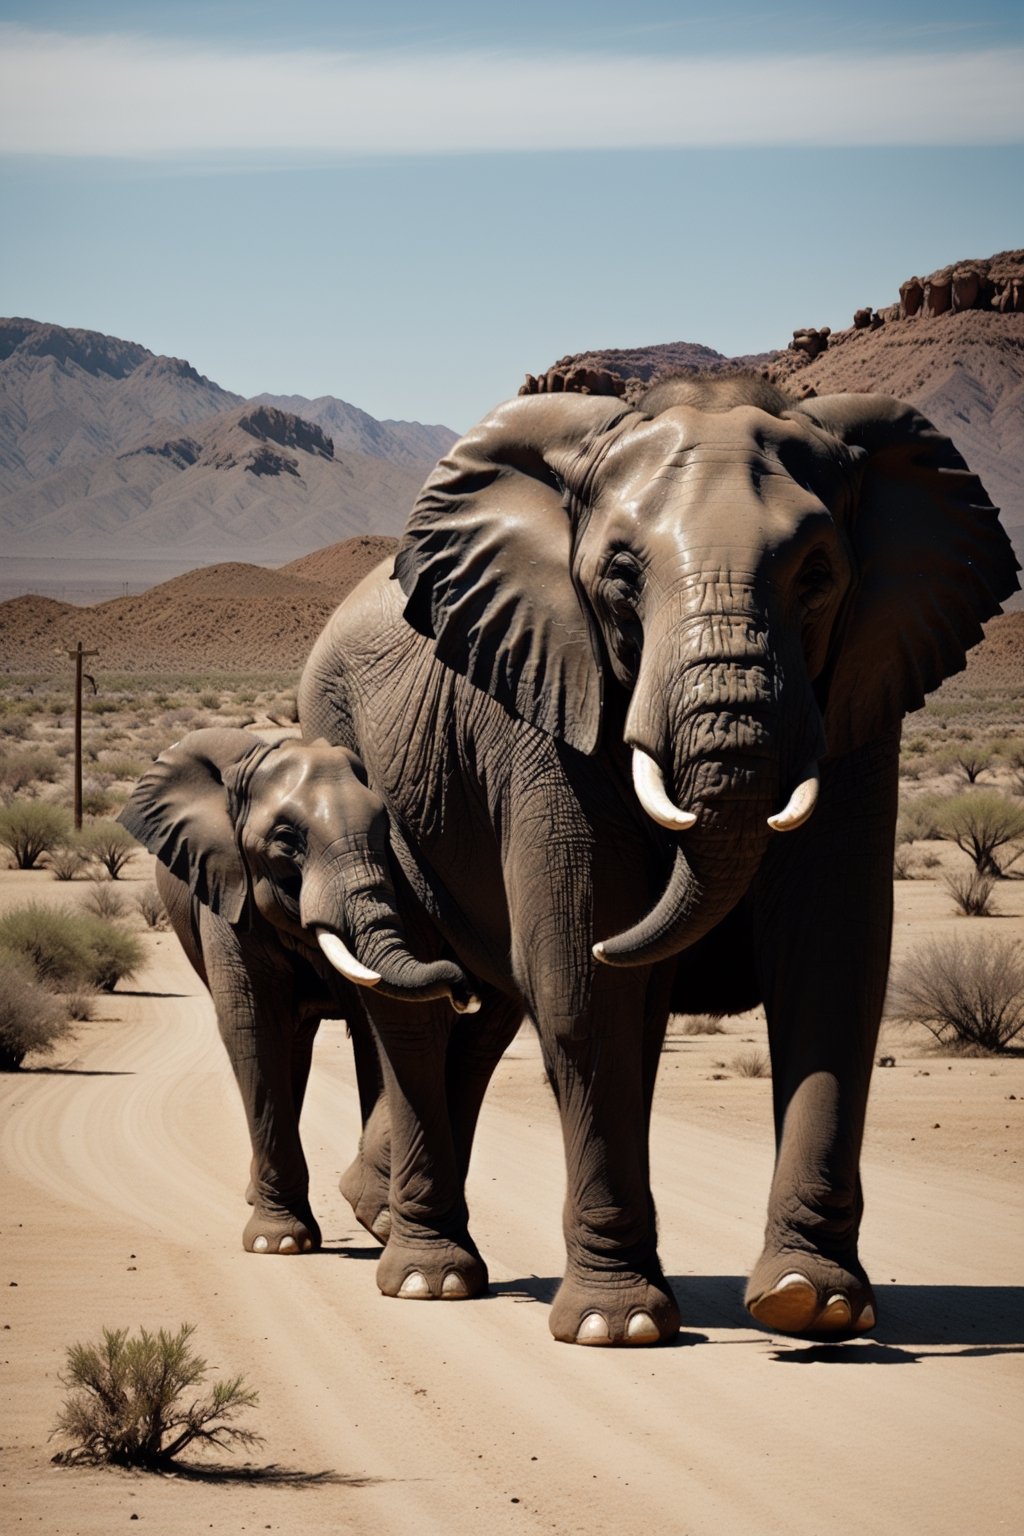 An 3 elephant parade in the Mojave desert